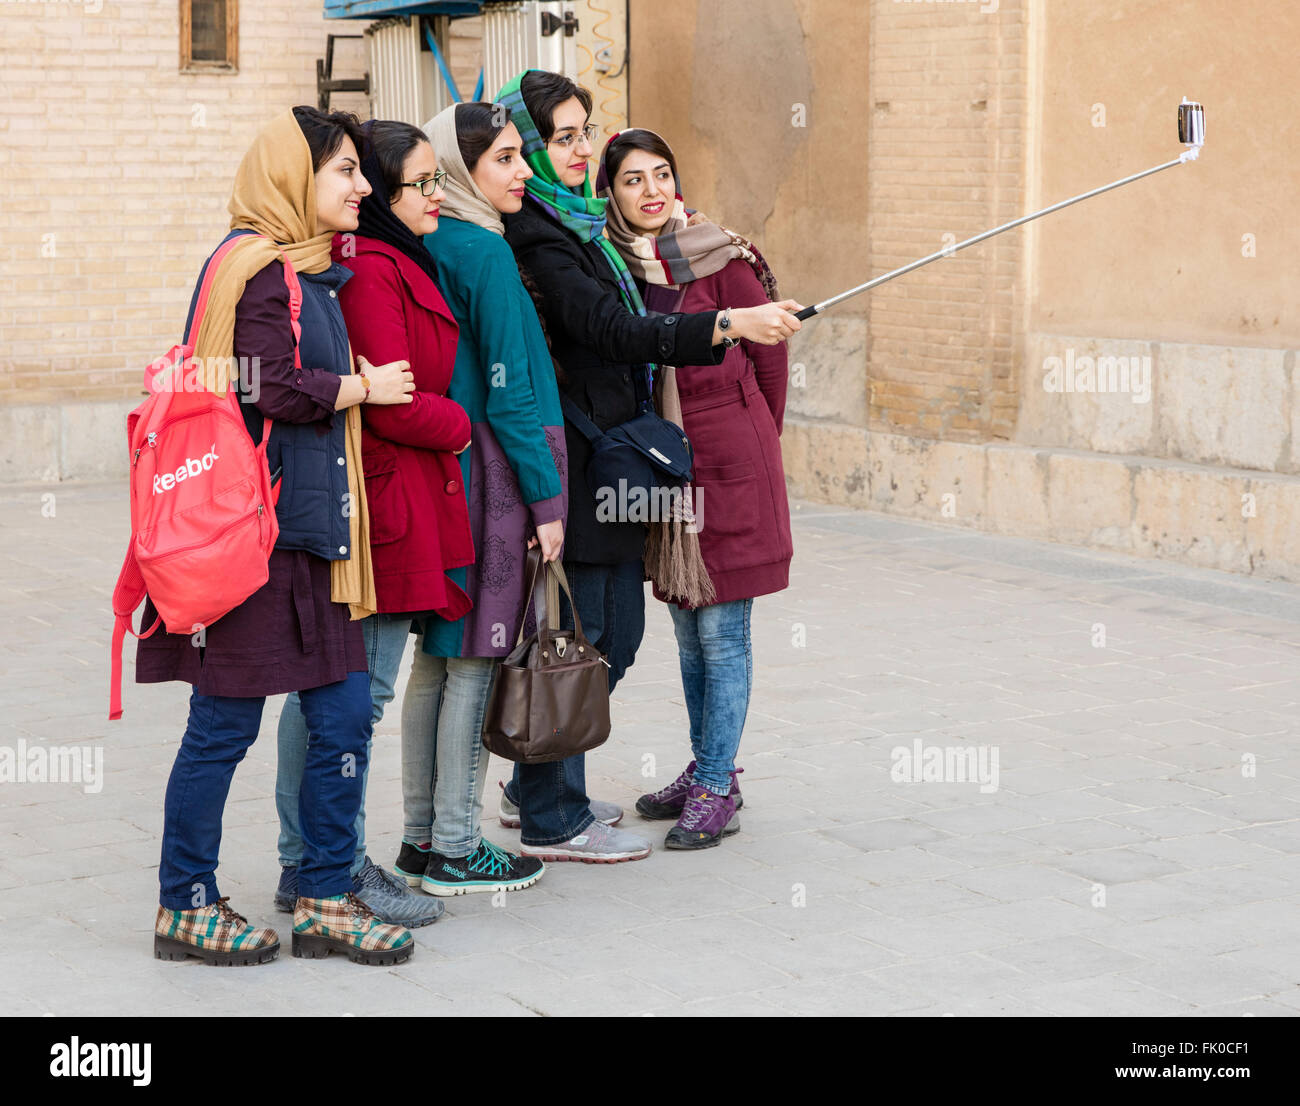 Five fashionably clad women pose for a selfie in courtyard of Armenian cathedral, Isfahan, Iran Stock Photo